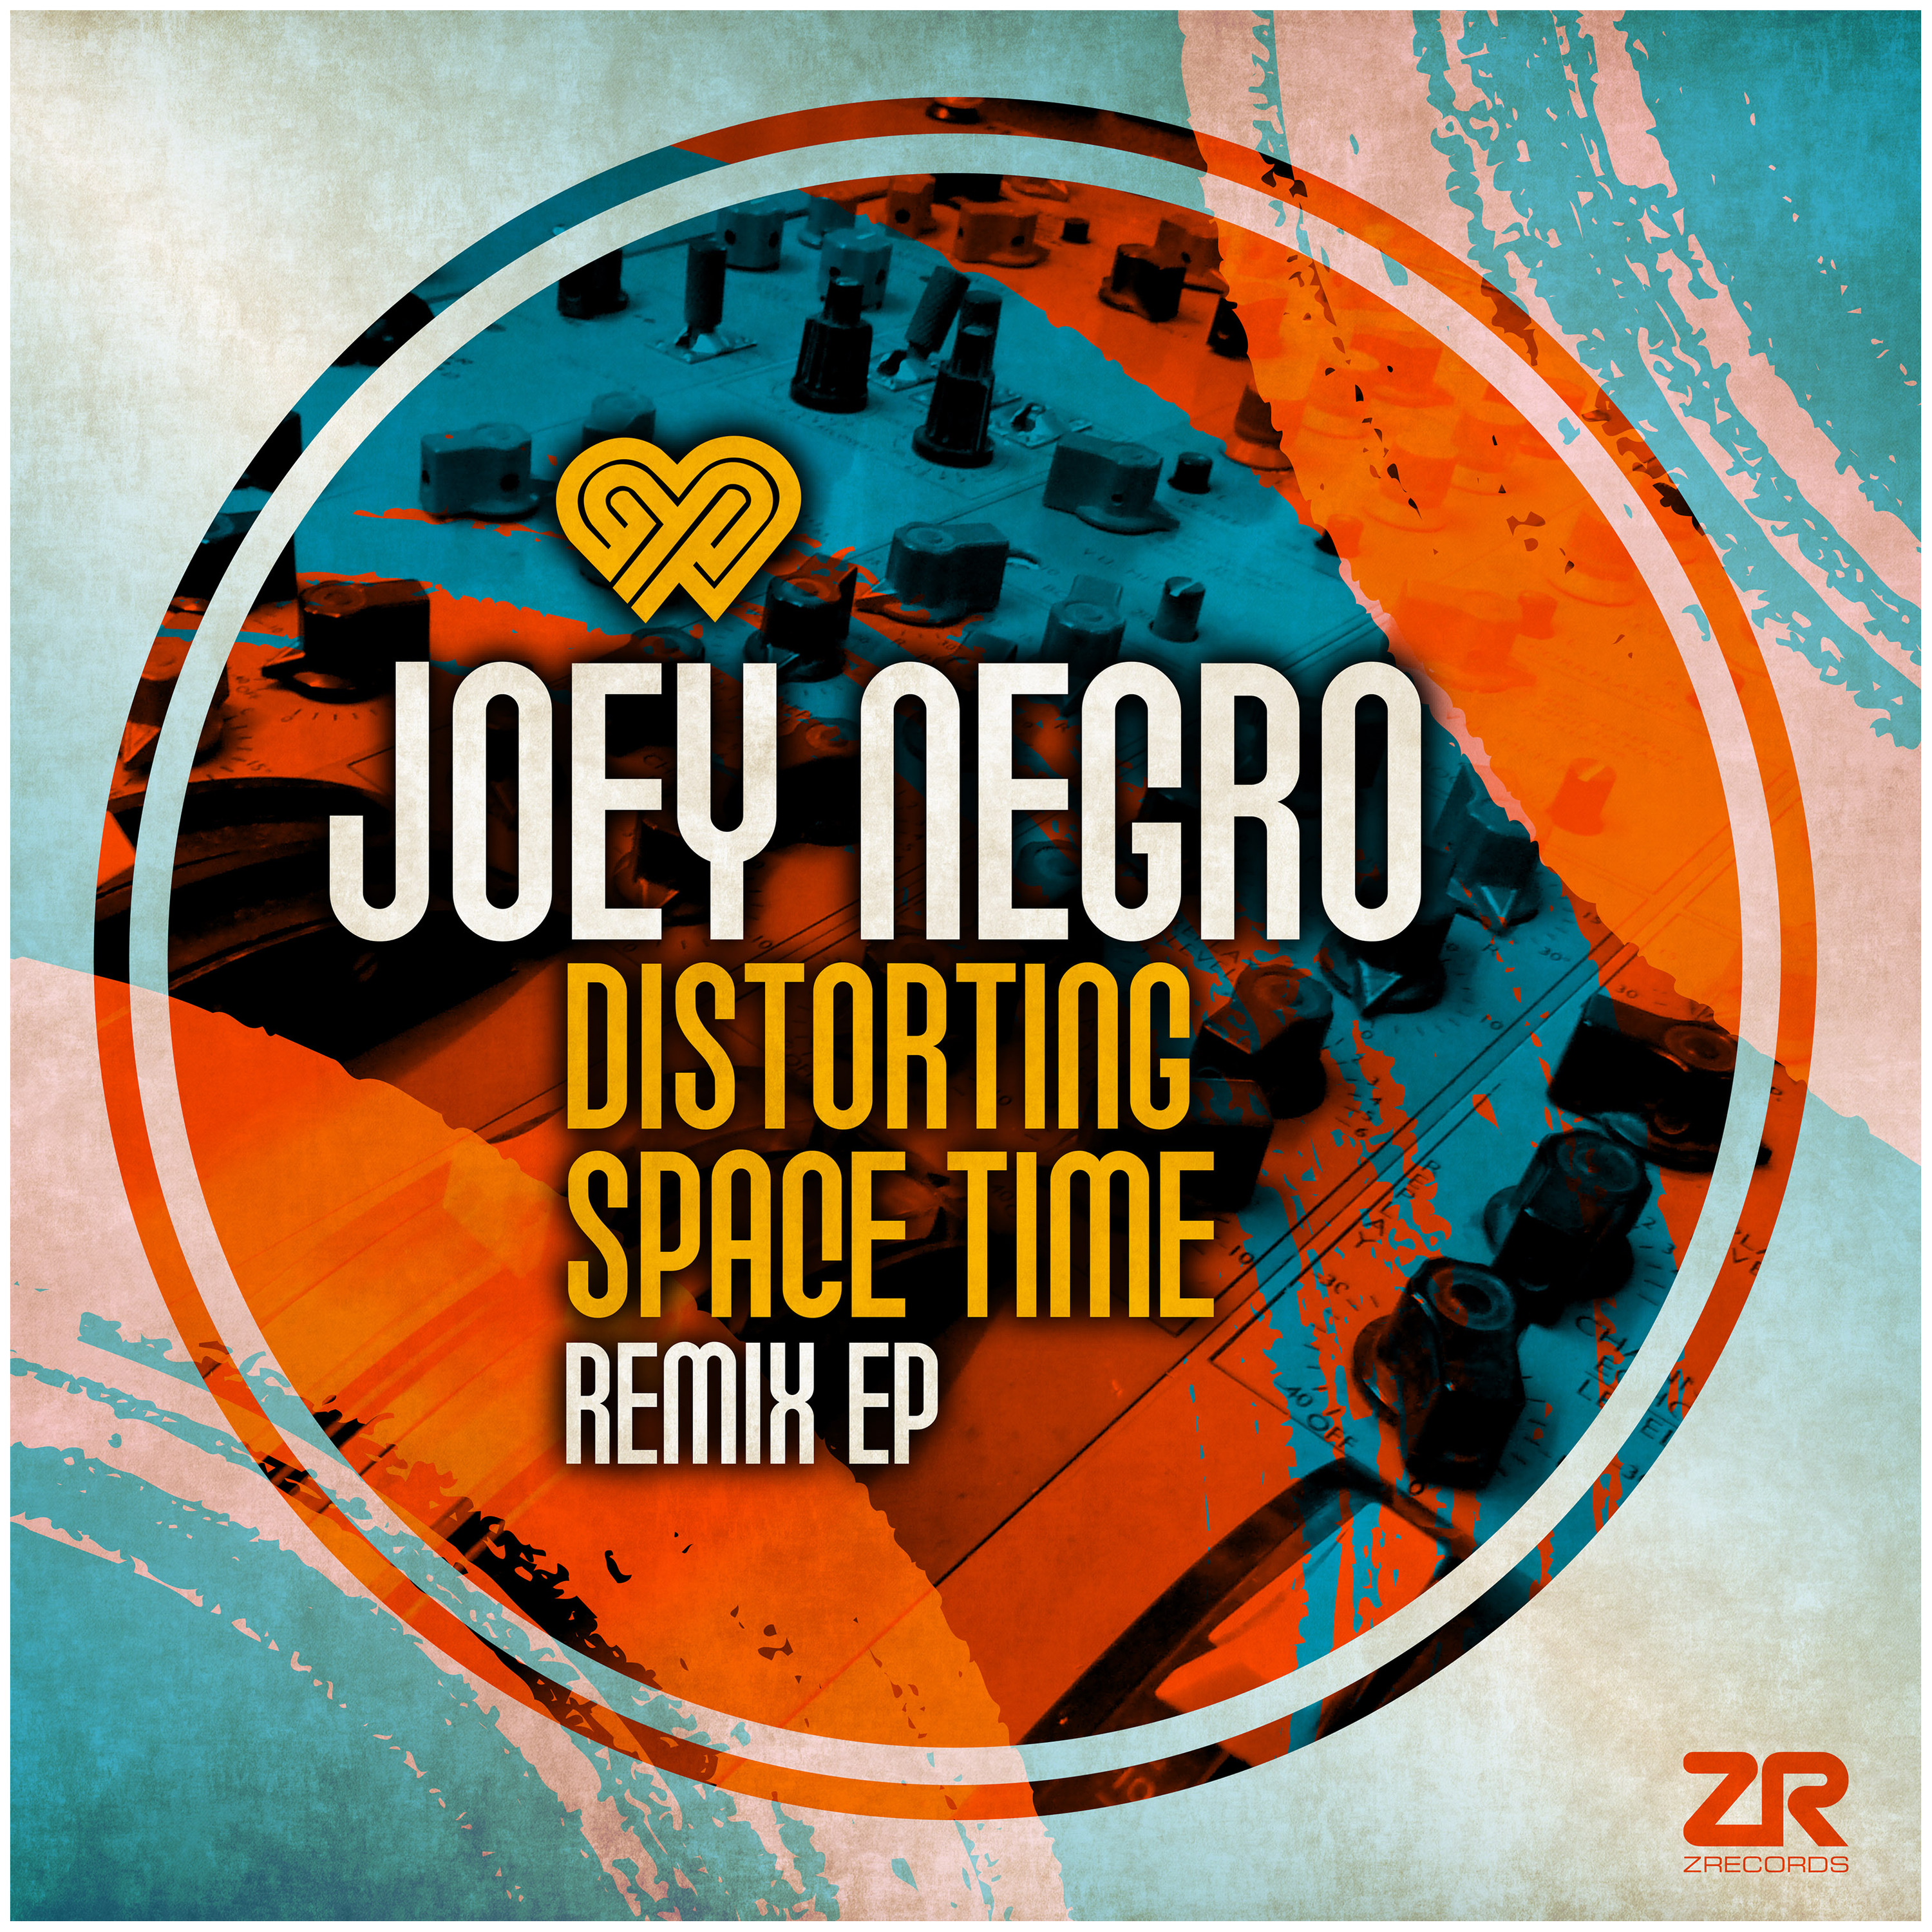 Distorting Space Time (Remix EP)